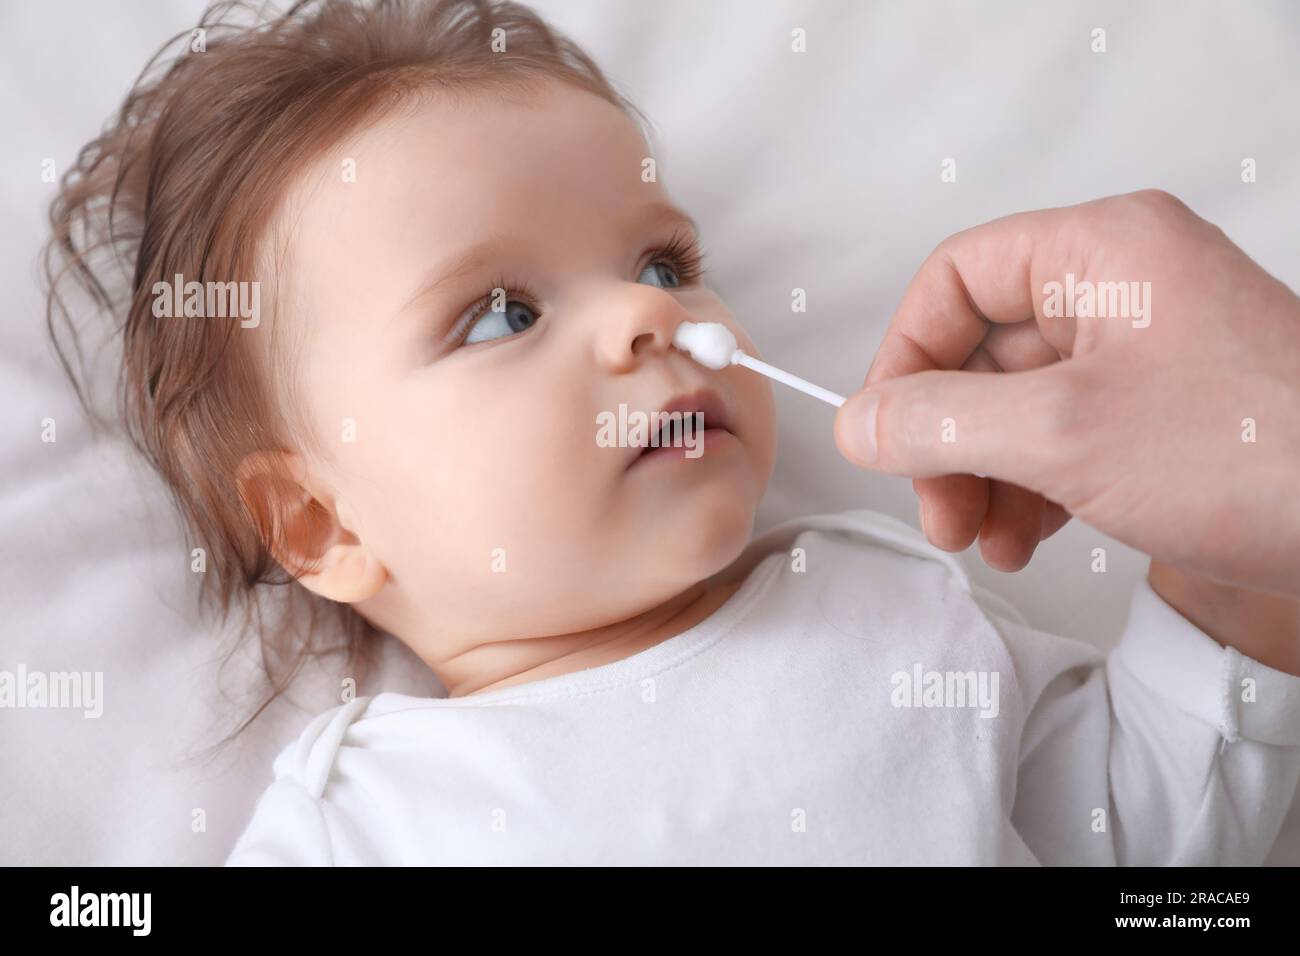 https://c8.alamy.com/comp/2RACAE9/father-cleaning-nose-of-his-baby-with-cotton-bud-on-bed-closeup-2RACAE9.jpg